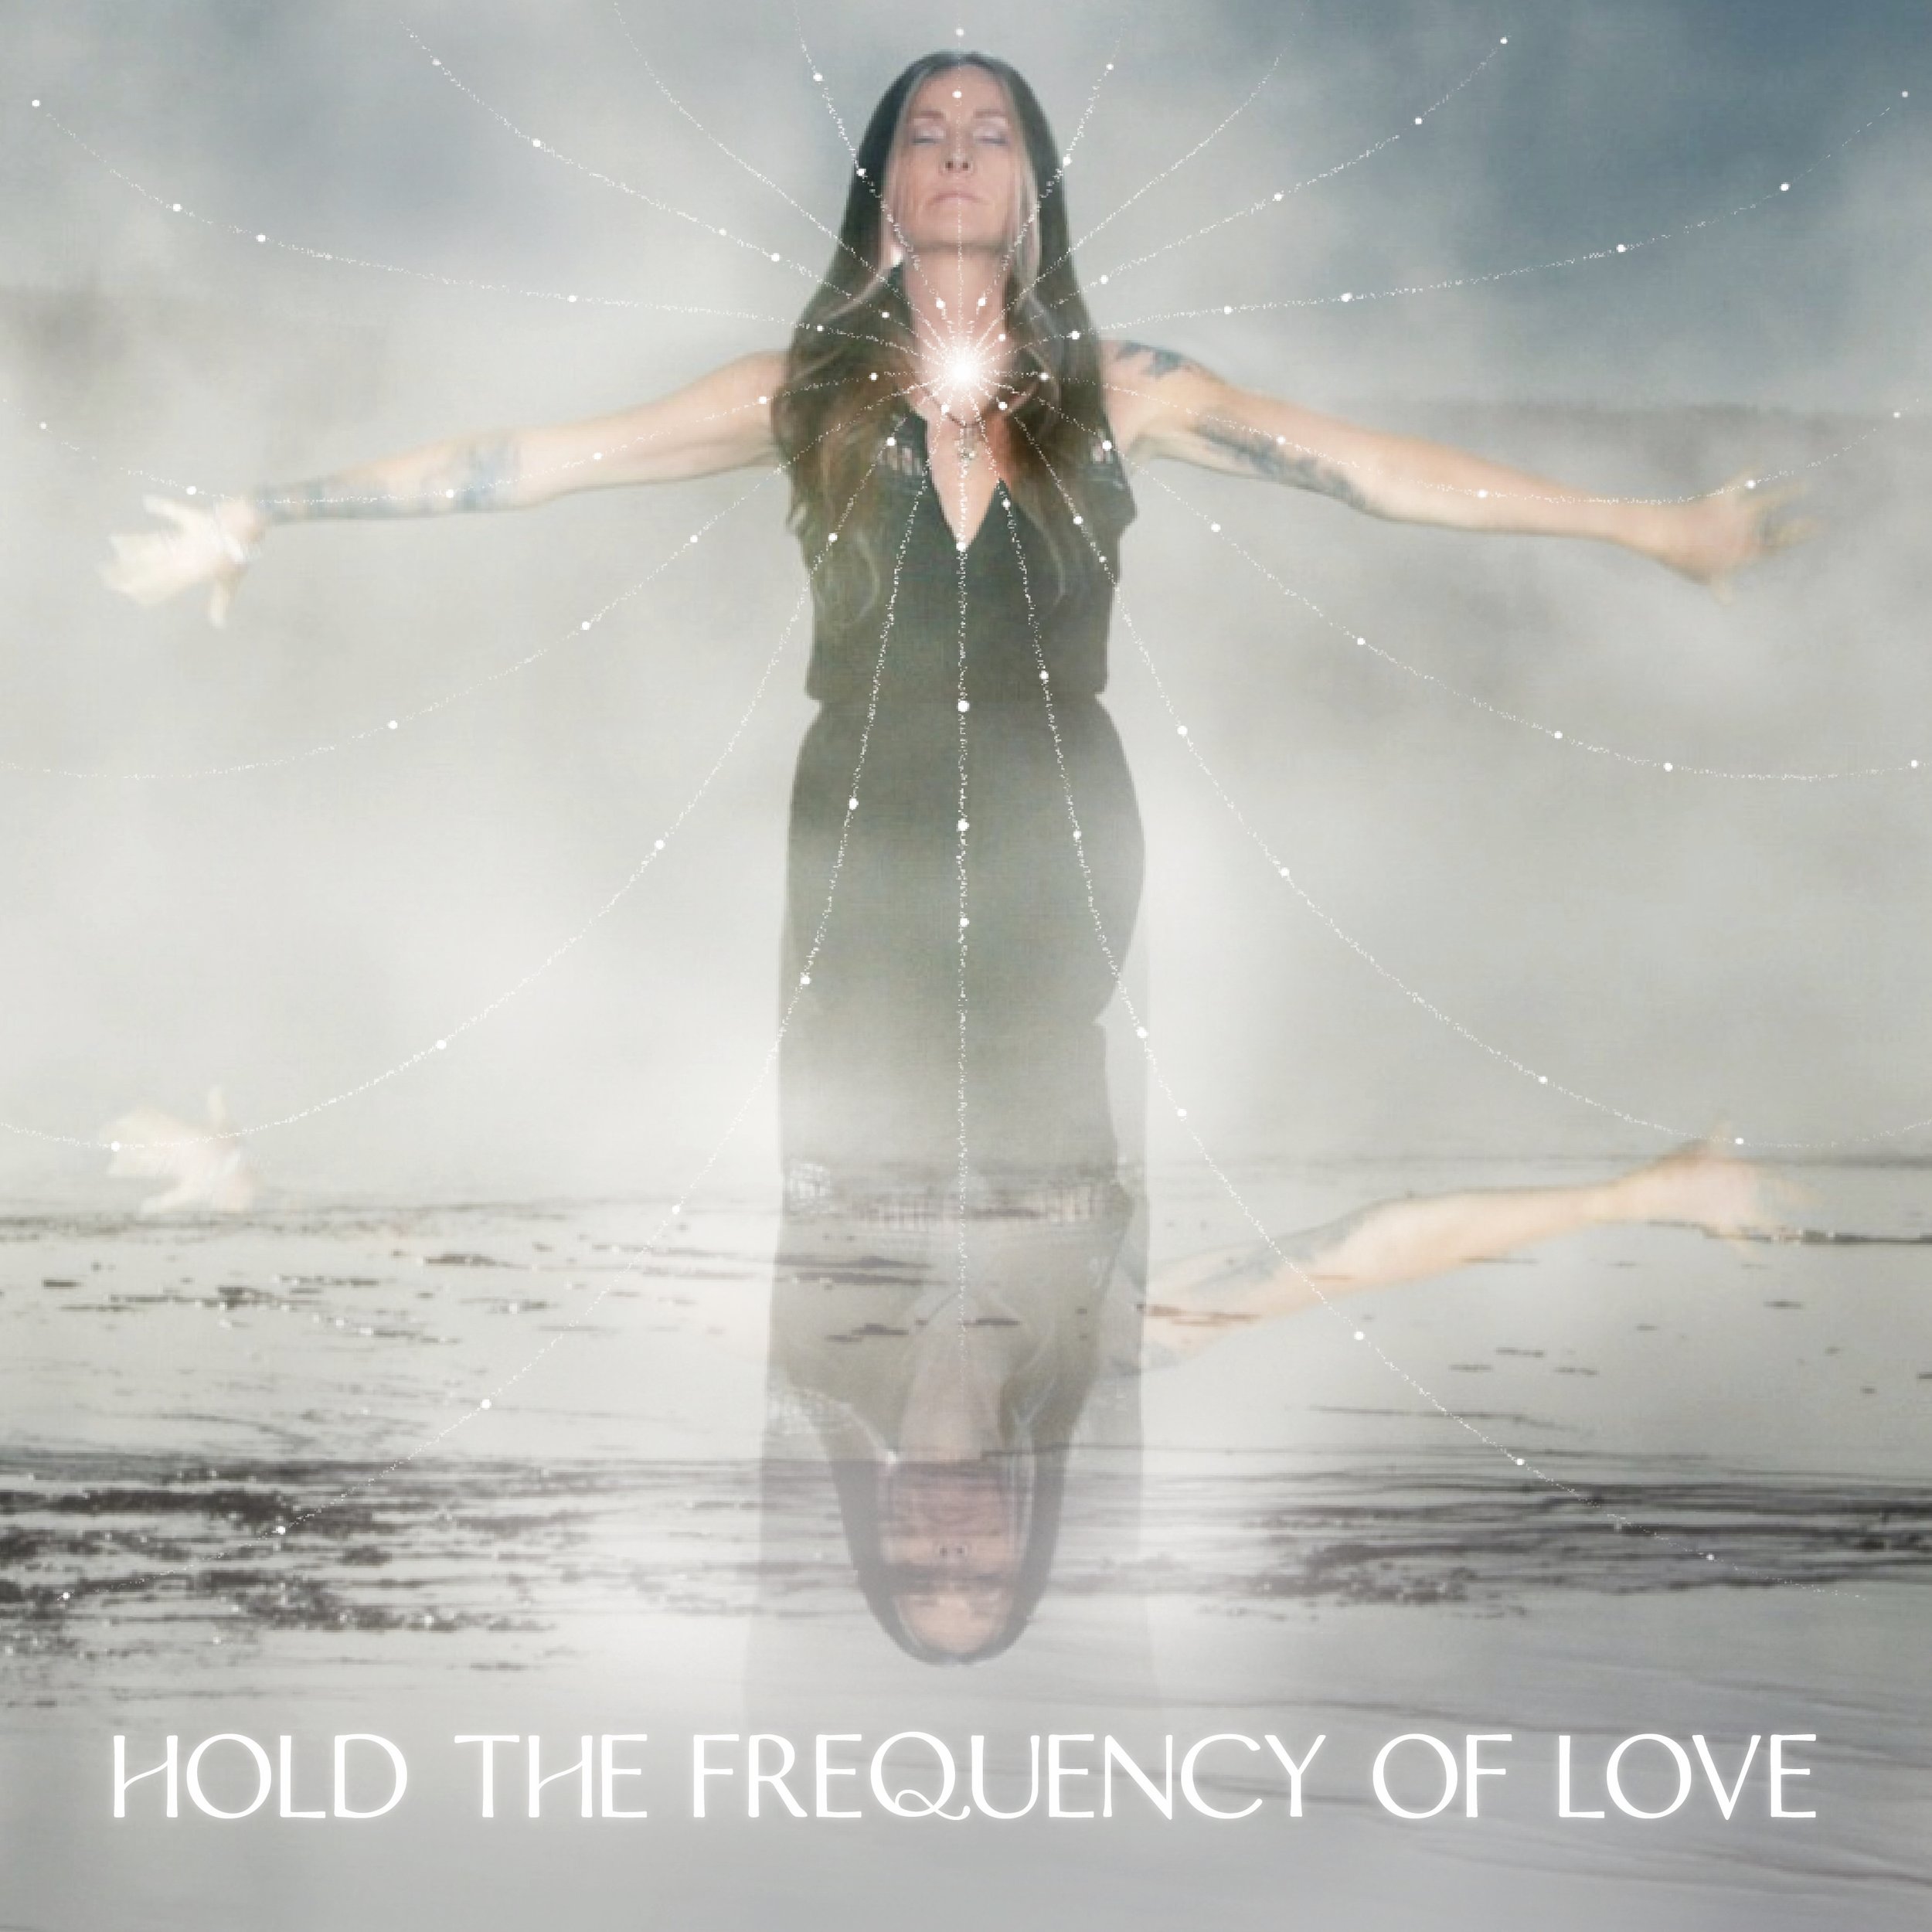 Hold the Frequency of Love_single song cover_3000px.jpg